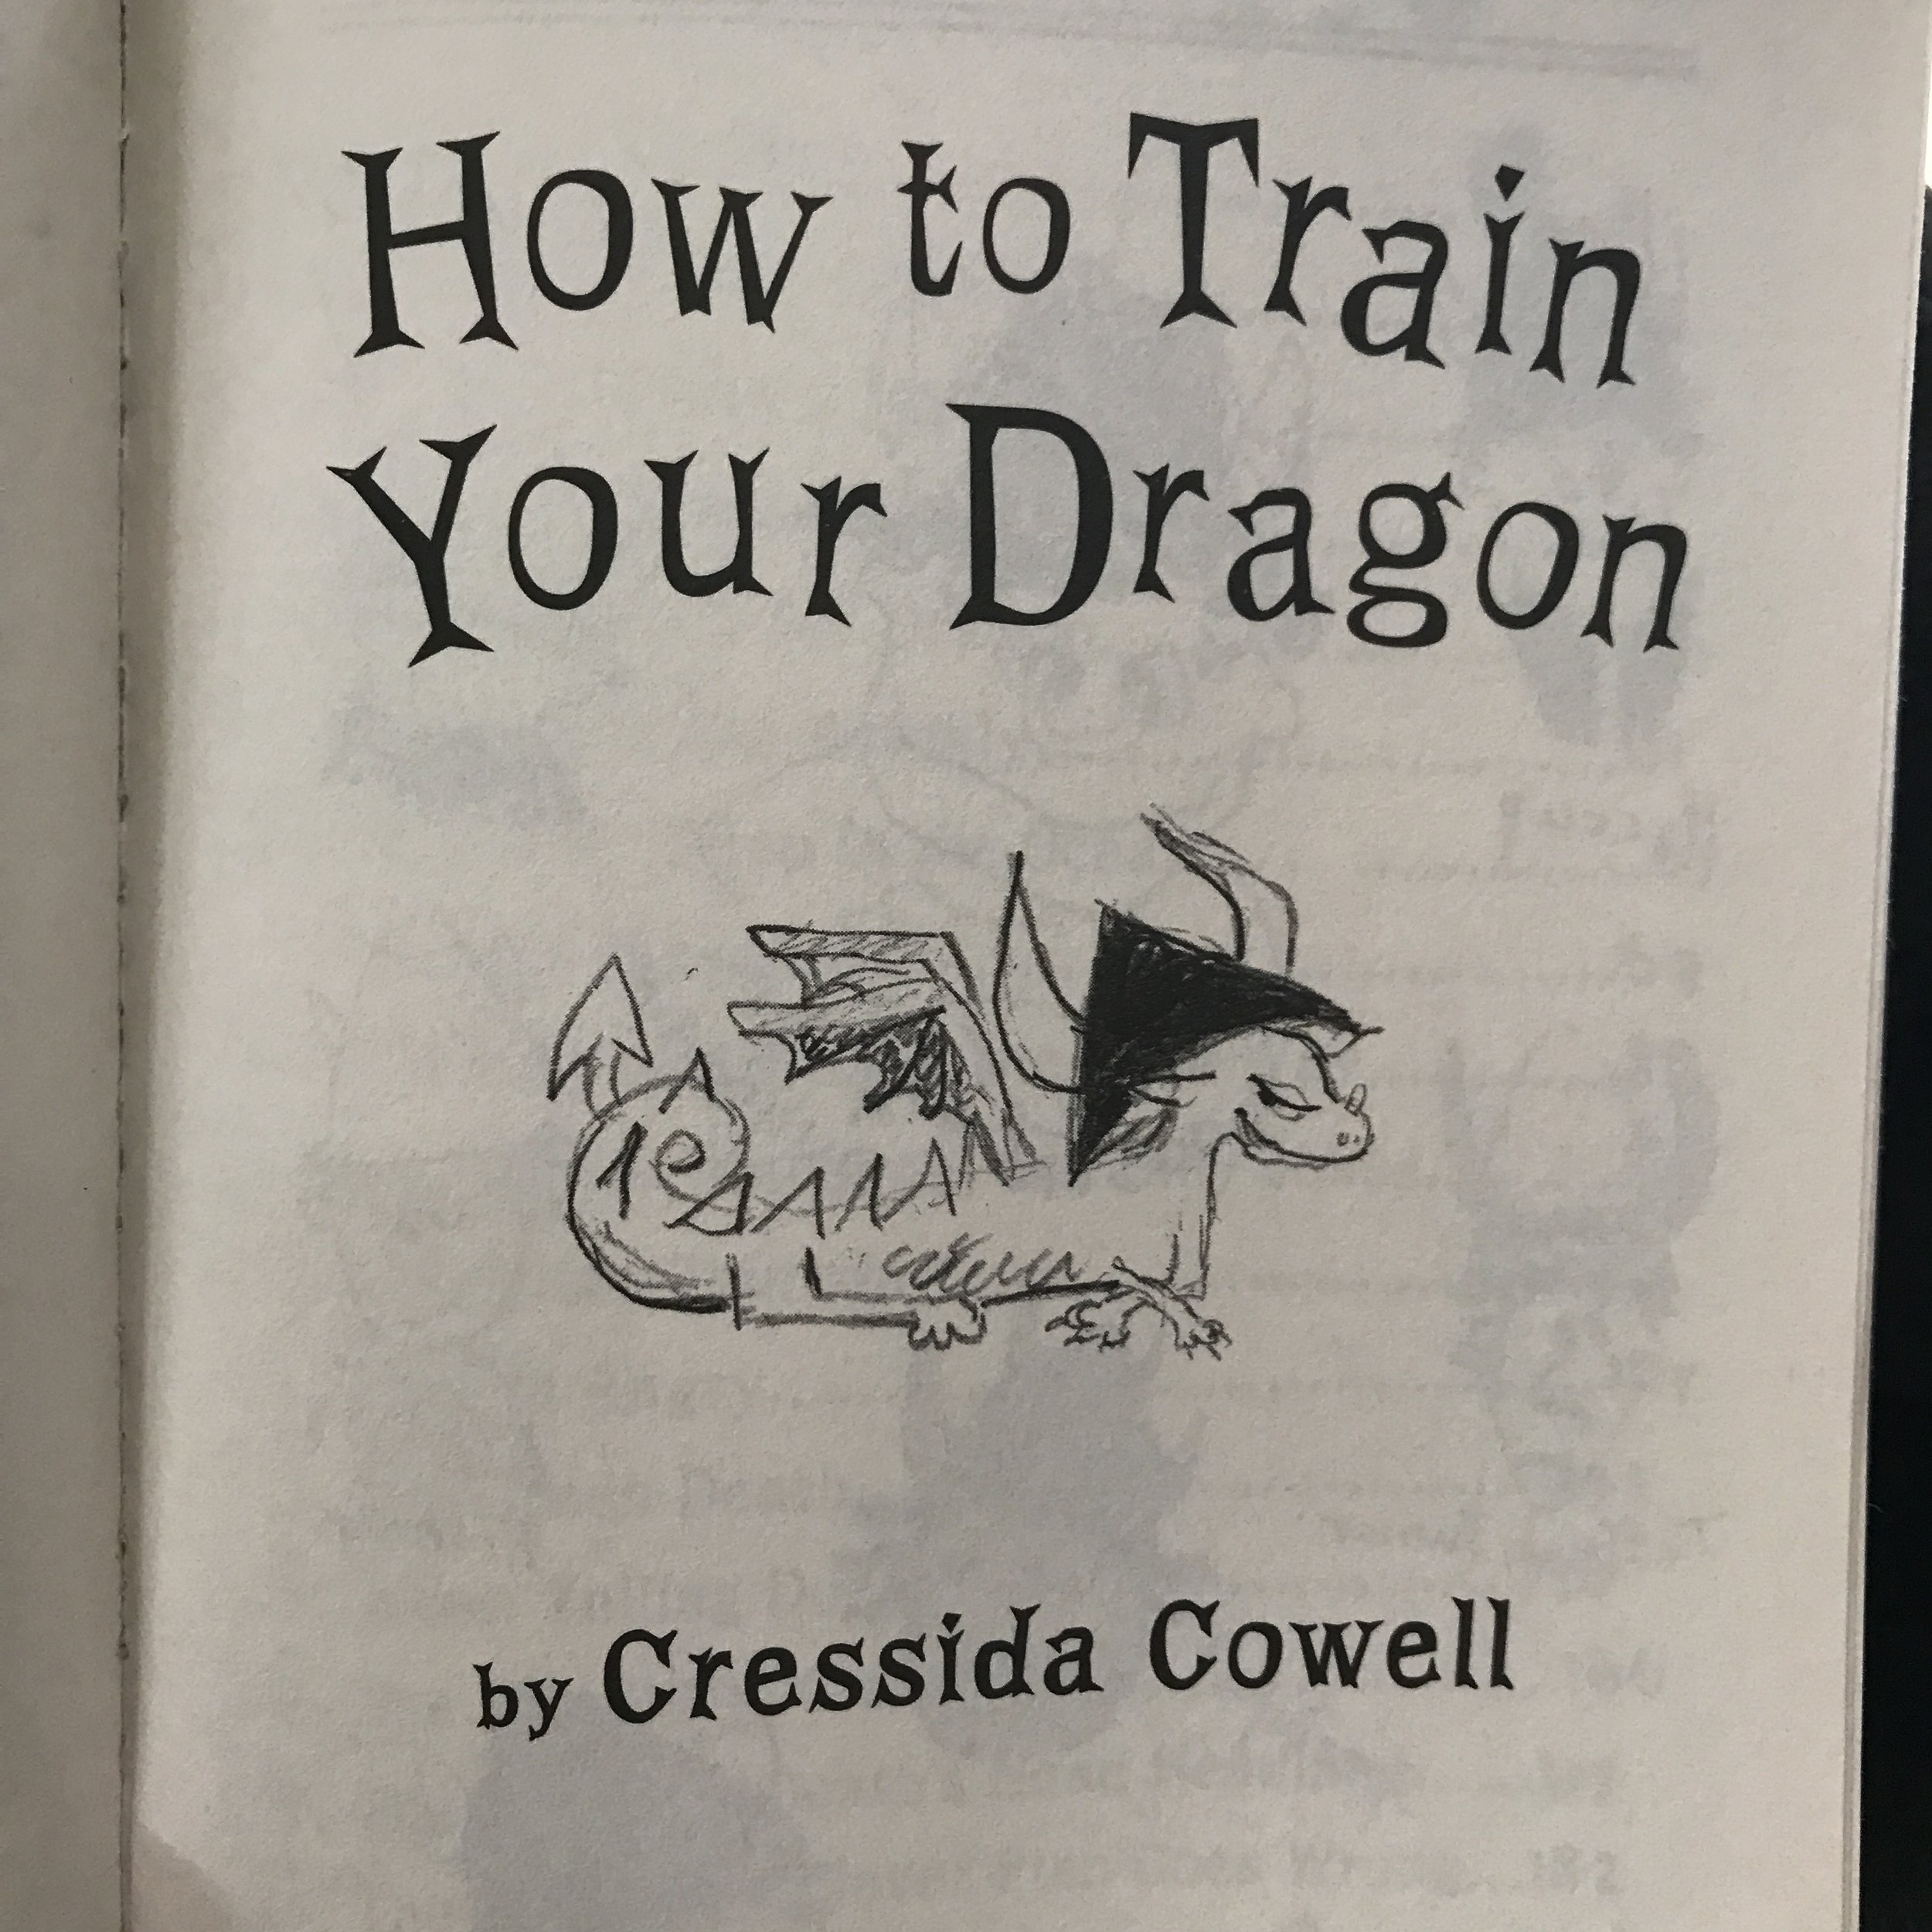 How to Train Your Dragon Excerpt1.JPG